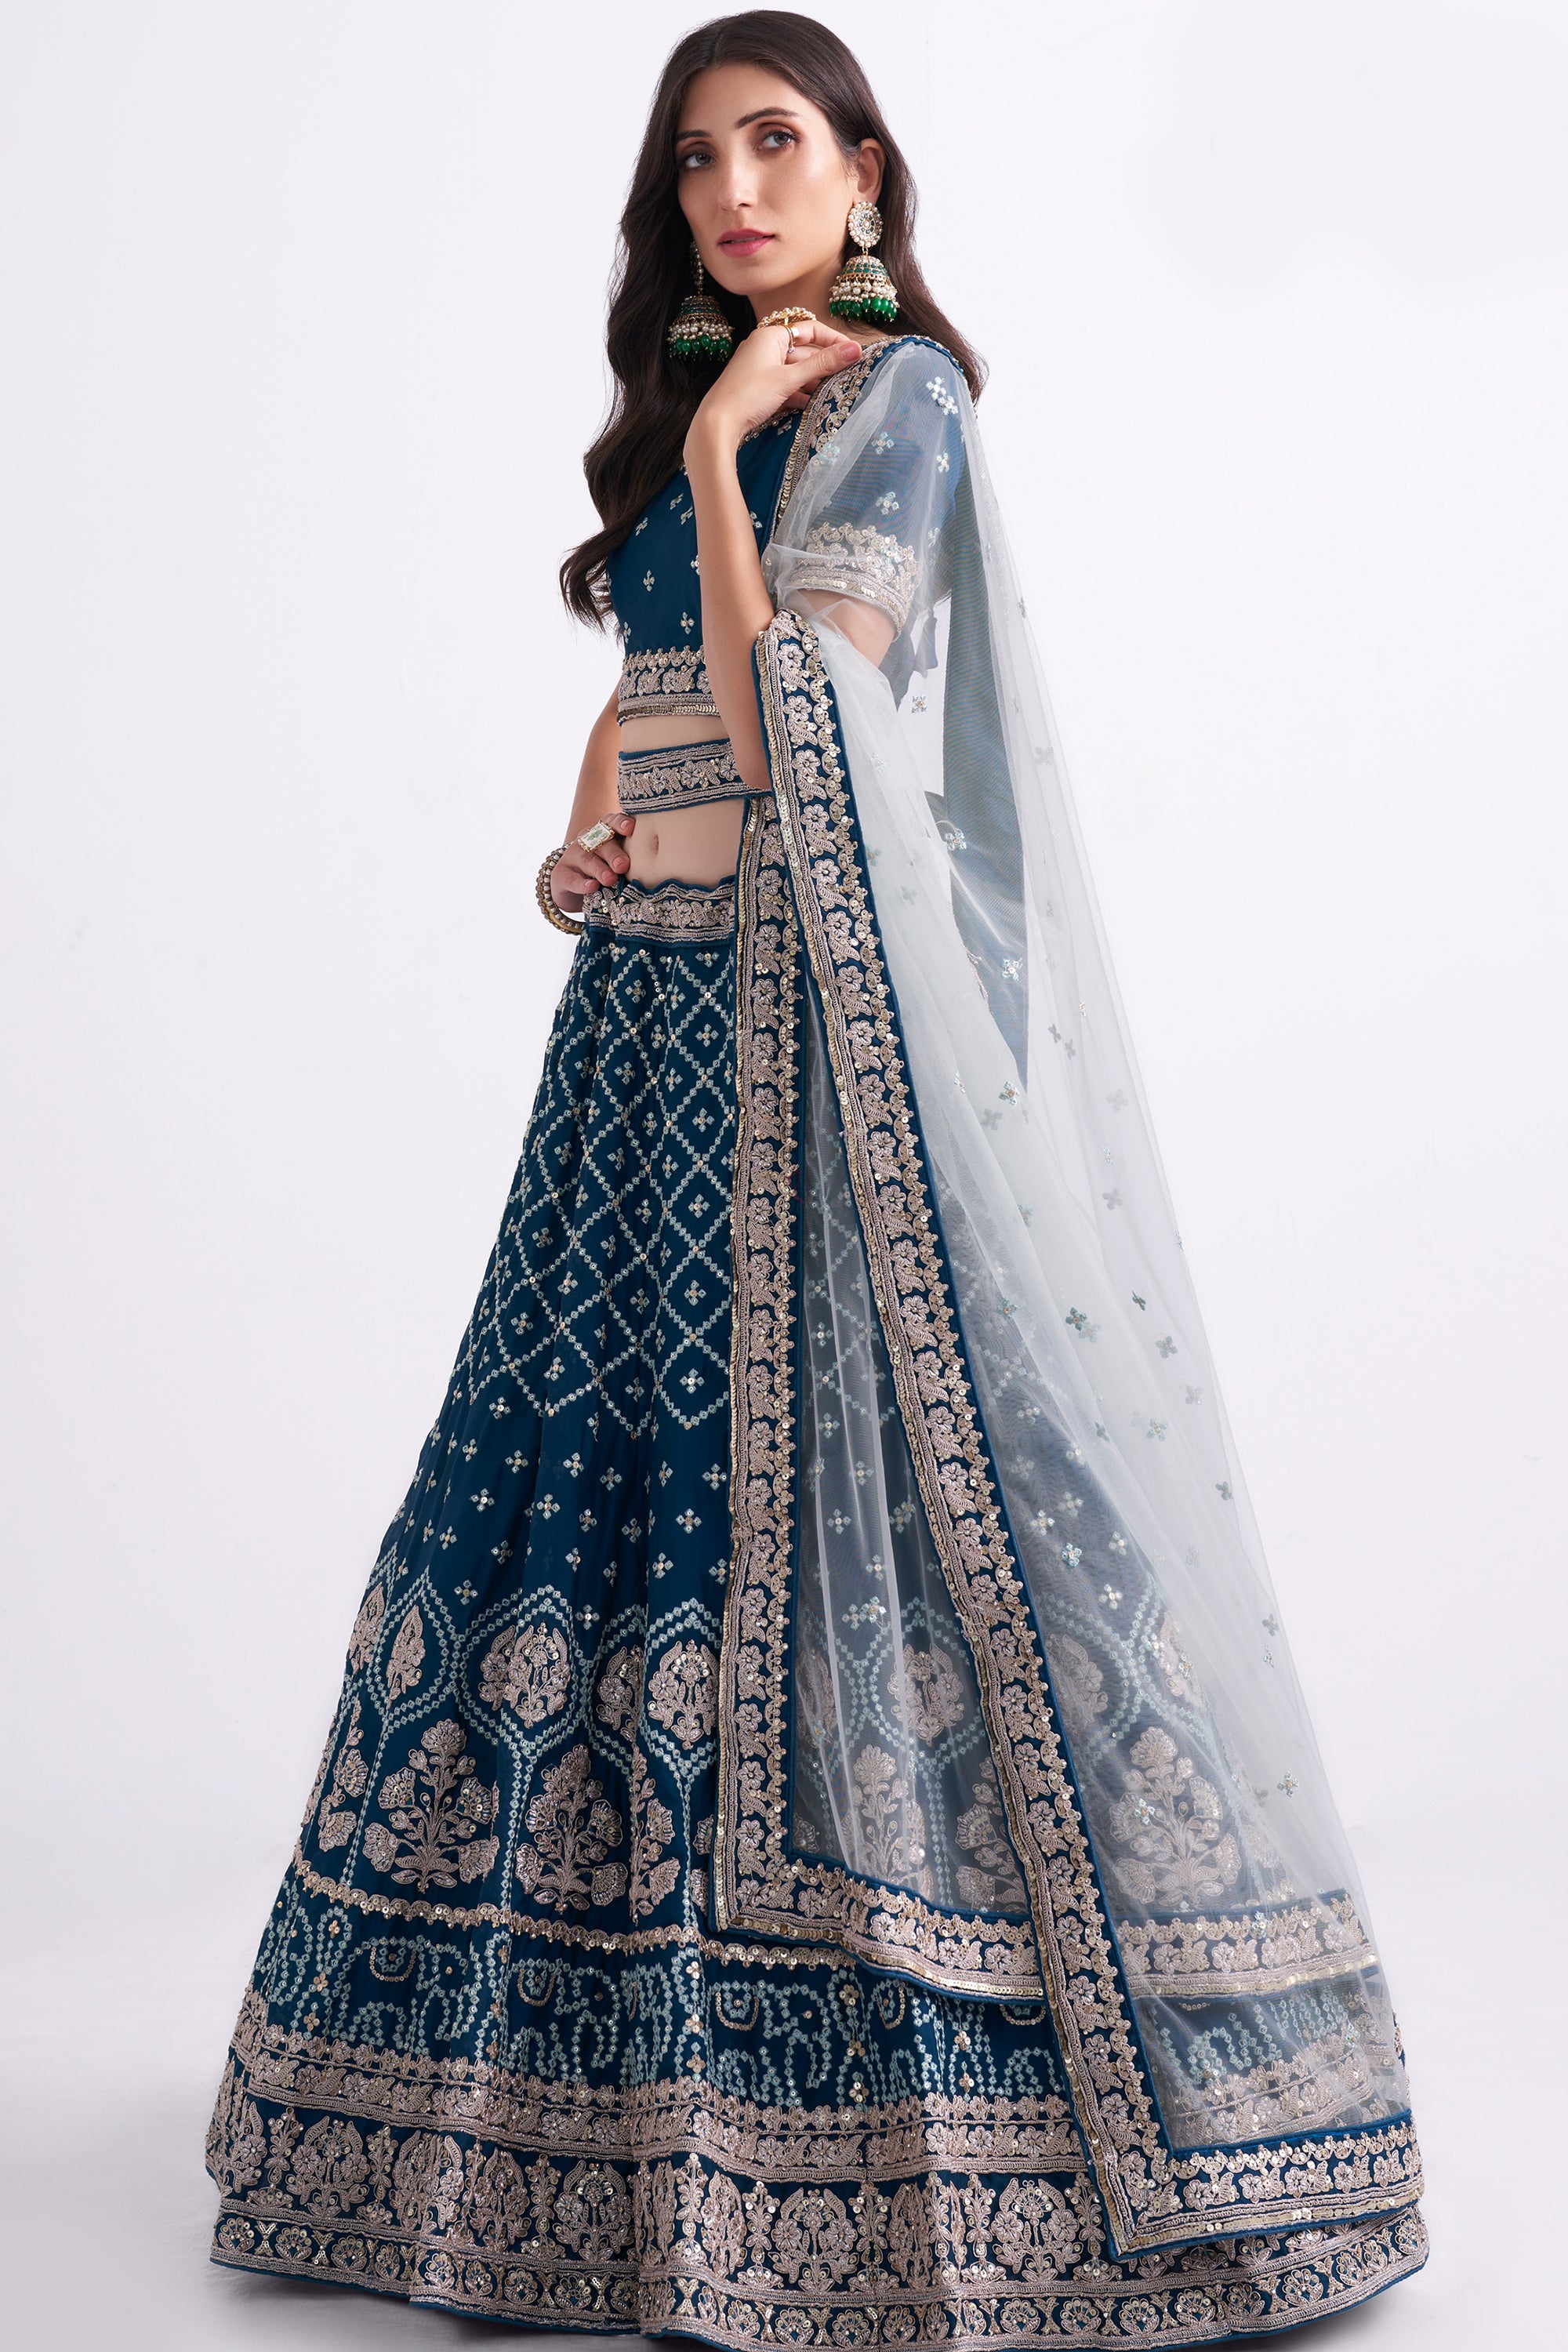 Women's Bridal Heritage Teal Blue Heavy Embroidered Silky Georgette Designer Lehenga - CHITRAS